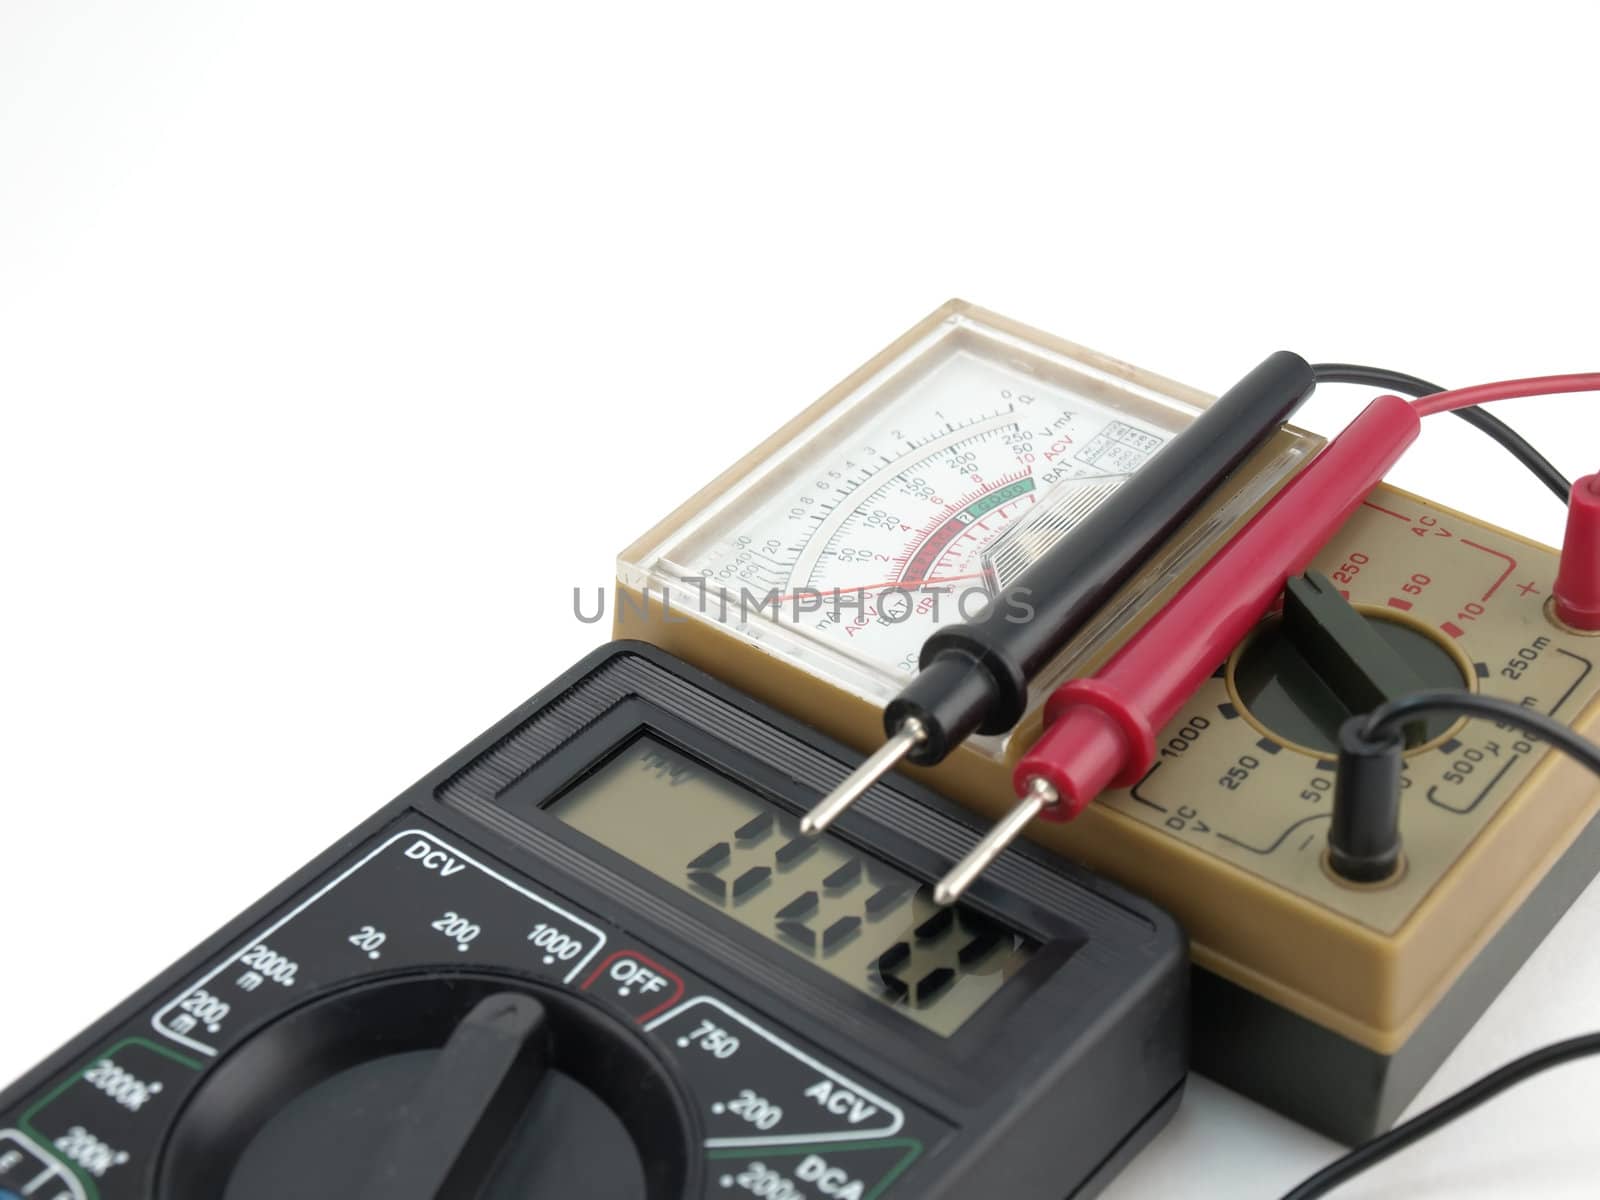 Pointer and digital multimeters by sergpet